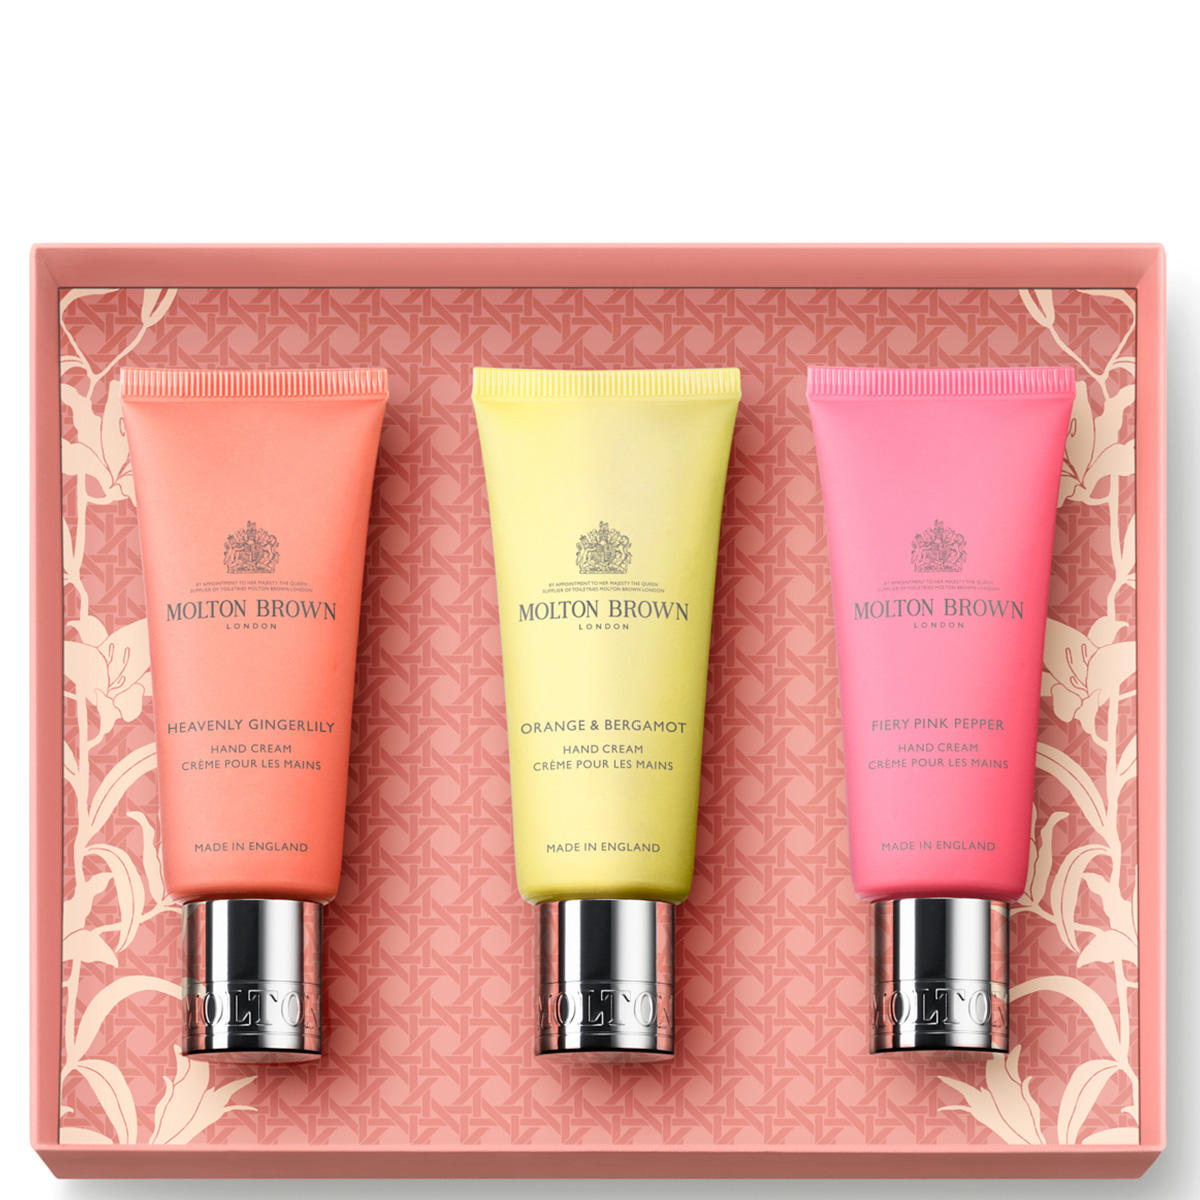 MOLTON BROWN Hand Care Gift Set Limited Edition  - 1